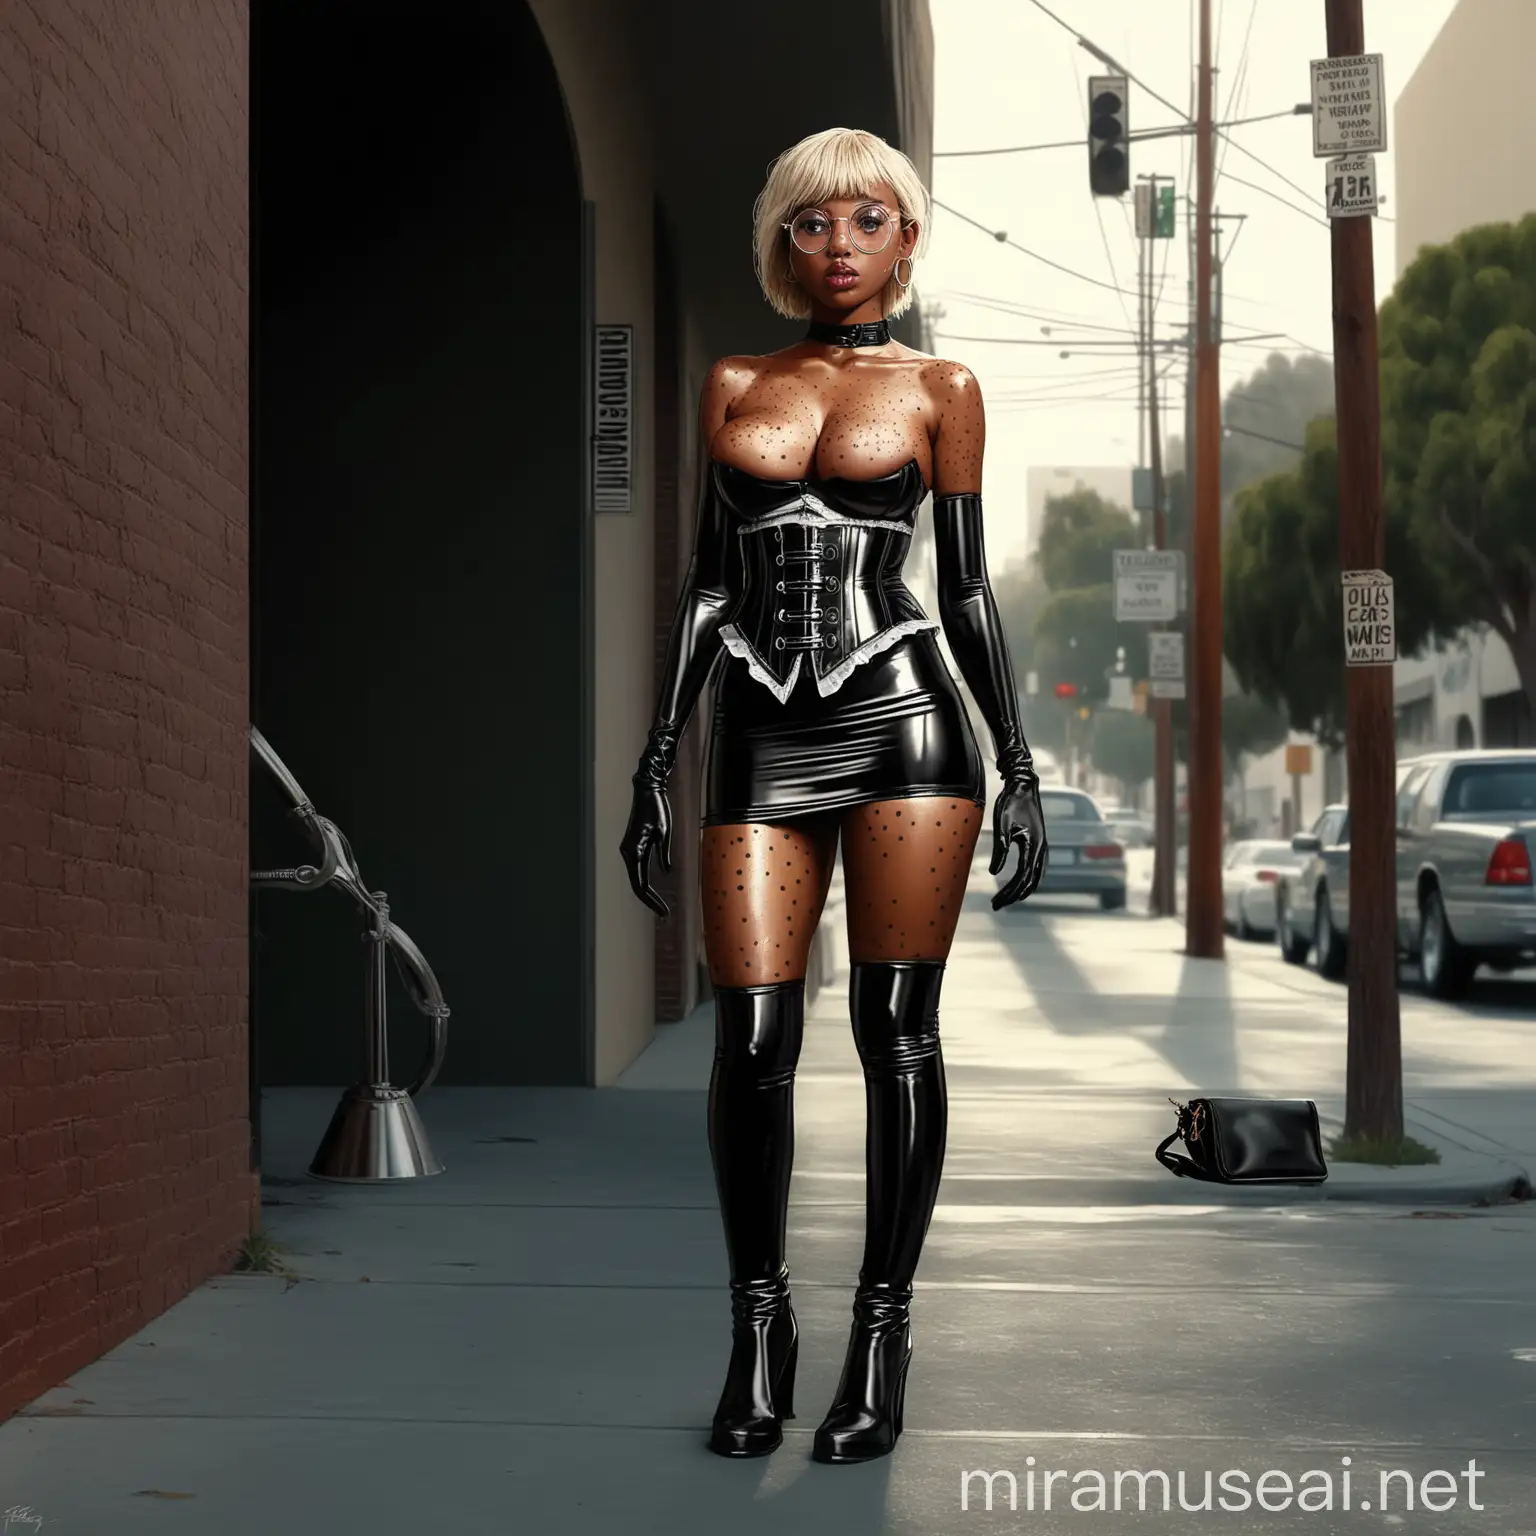 young Asian Latin woman with dark skin, with freckles on her face, with black and white hair wearing long latex boots, corset and mini skirt, long gloves, rock styleyoung Asian Latin woman with dark skin, with freckles on her face, with Poptarting black and blond hair wearing long latex boots, corset latex and mini skirt latex , long gloves latex , rock style clothes, round prescription glasses, hoop earrings, working in los angeles figueroa street,,((latex wallet)),,, A woman drawn with a high level of detail and a brilliant, almost hyper-realistic quality, typical of the fantastic art of . ,, and high-heeled boots, her outfit accentuates her body, reflective, shiny. realistic, epic masterpiece, cinematic experience, 8k, fantasy digital art, HDR, UHD. This contrast between the fantastical character and the more traditional color scheme and elements gives the piece an intriguing narrative quality. The model is standing looking at the camera, with one leg extended out towards the camera. , toned legs, long lashes, (naturally smooth skin, defined high cheekbones), face details, magic, digital painting, digital illustration, extreme details, digital art, 4k, ultra hd, hyperrealism, art season trends, vintage photography, tumblr aesthetic, fantasy DnD, hd photography, hyperrealism, [light freckles]. . Fleshy lips. Her hair is straight, no waves or anything, just straight ((Big breast))full body.los angeles figueroa street,walking down the street with one leg in front of the other and hand on waist FULL BODY